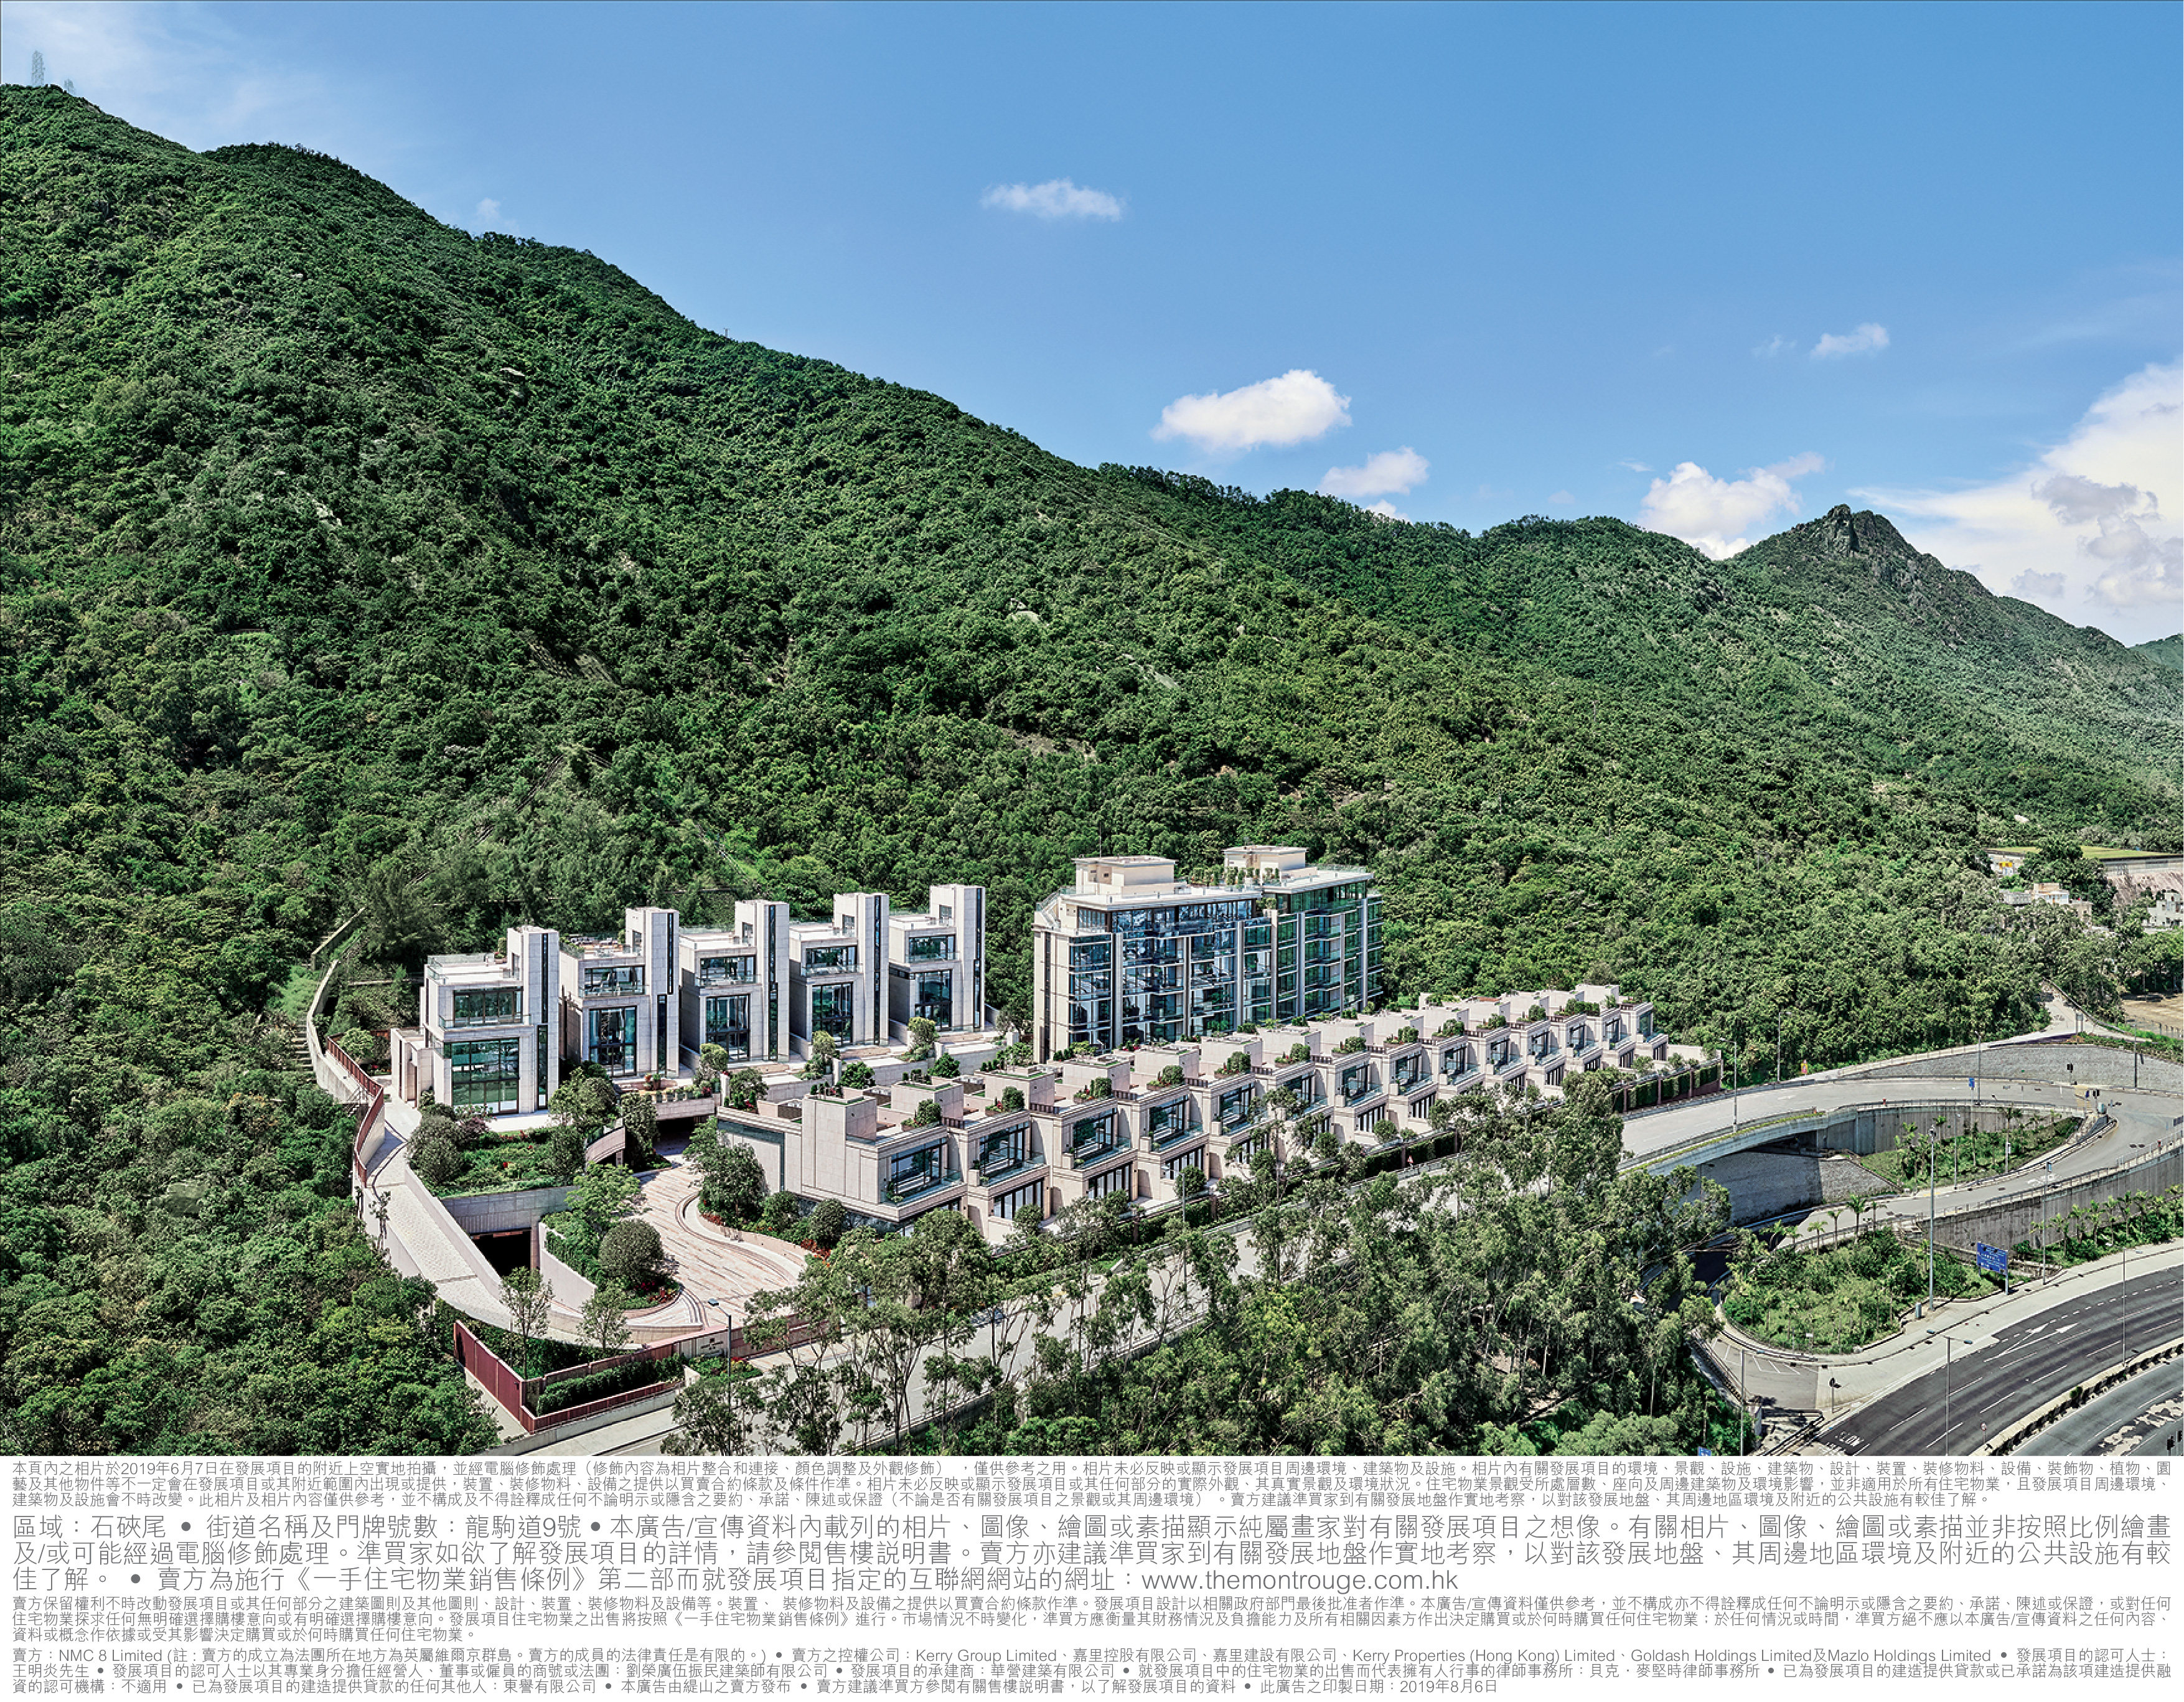 Kerry Properties’ Mont Rouge development in Kowloon Tong comprises five villas, 14 smaller houses and flats in two towers. Photo: Handout